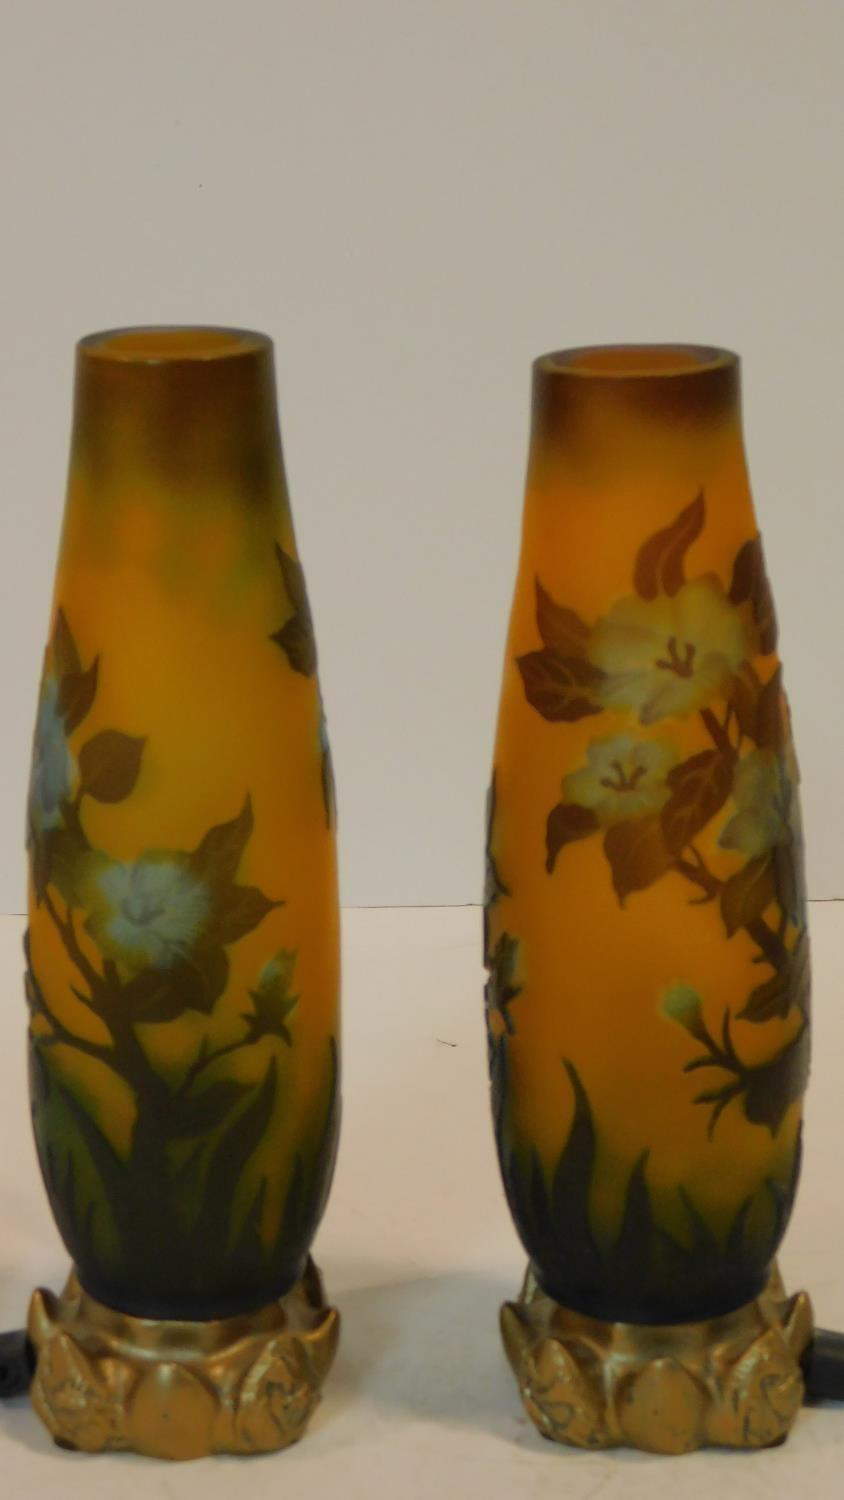 A pair of Galle style cameo glass lamps with floral design on gilded metal floral form bases. H.23cm